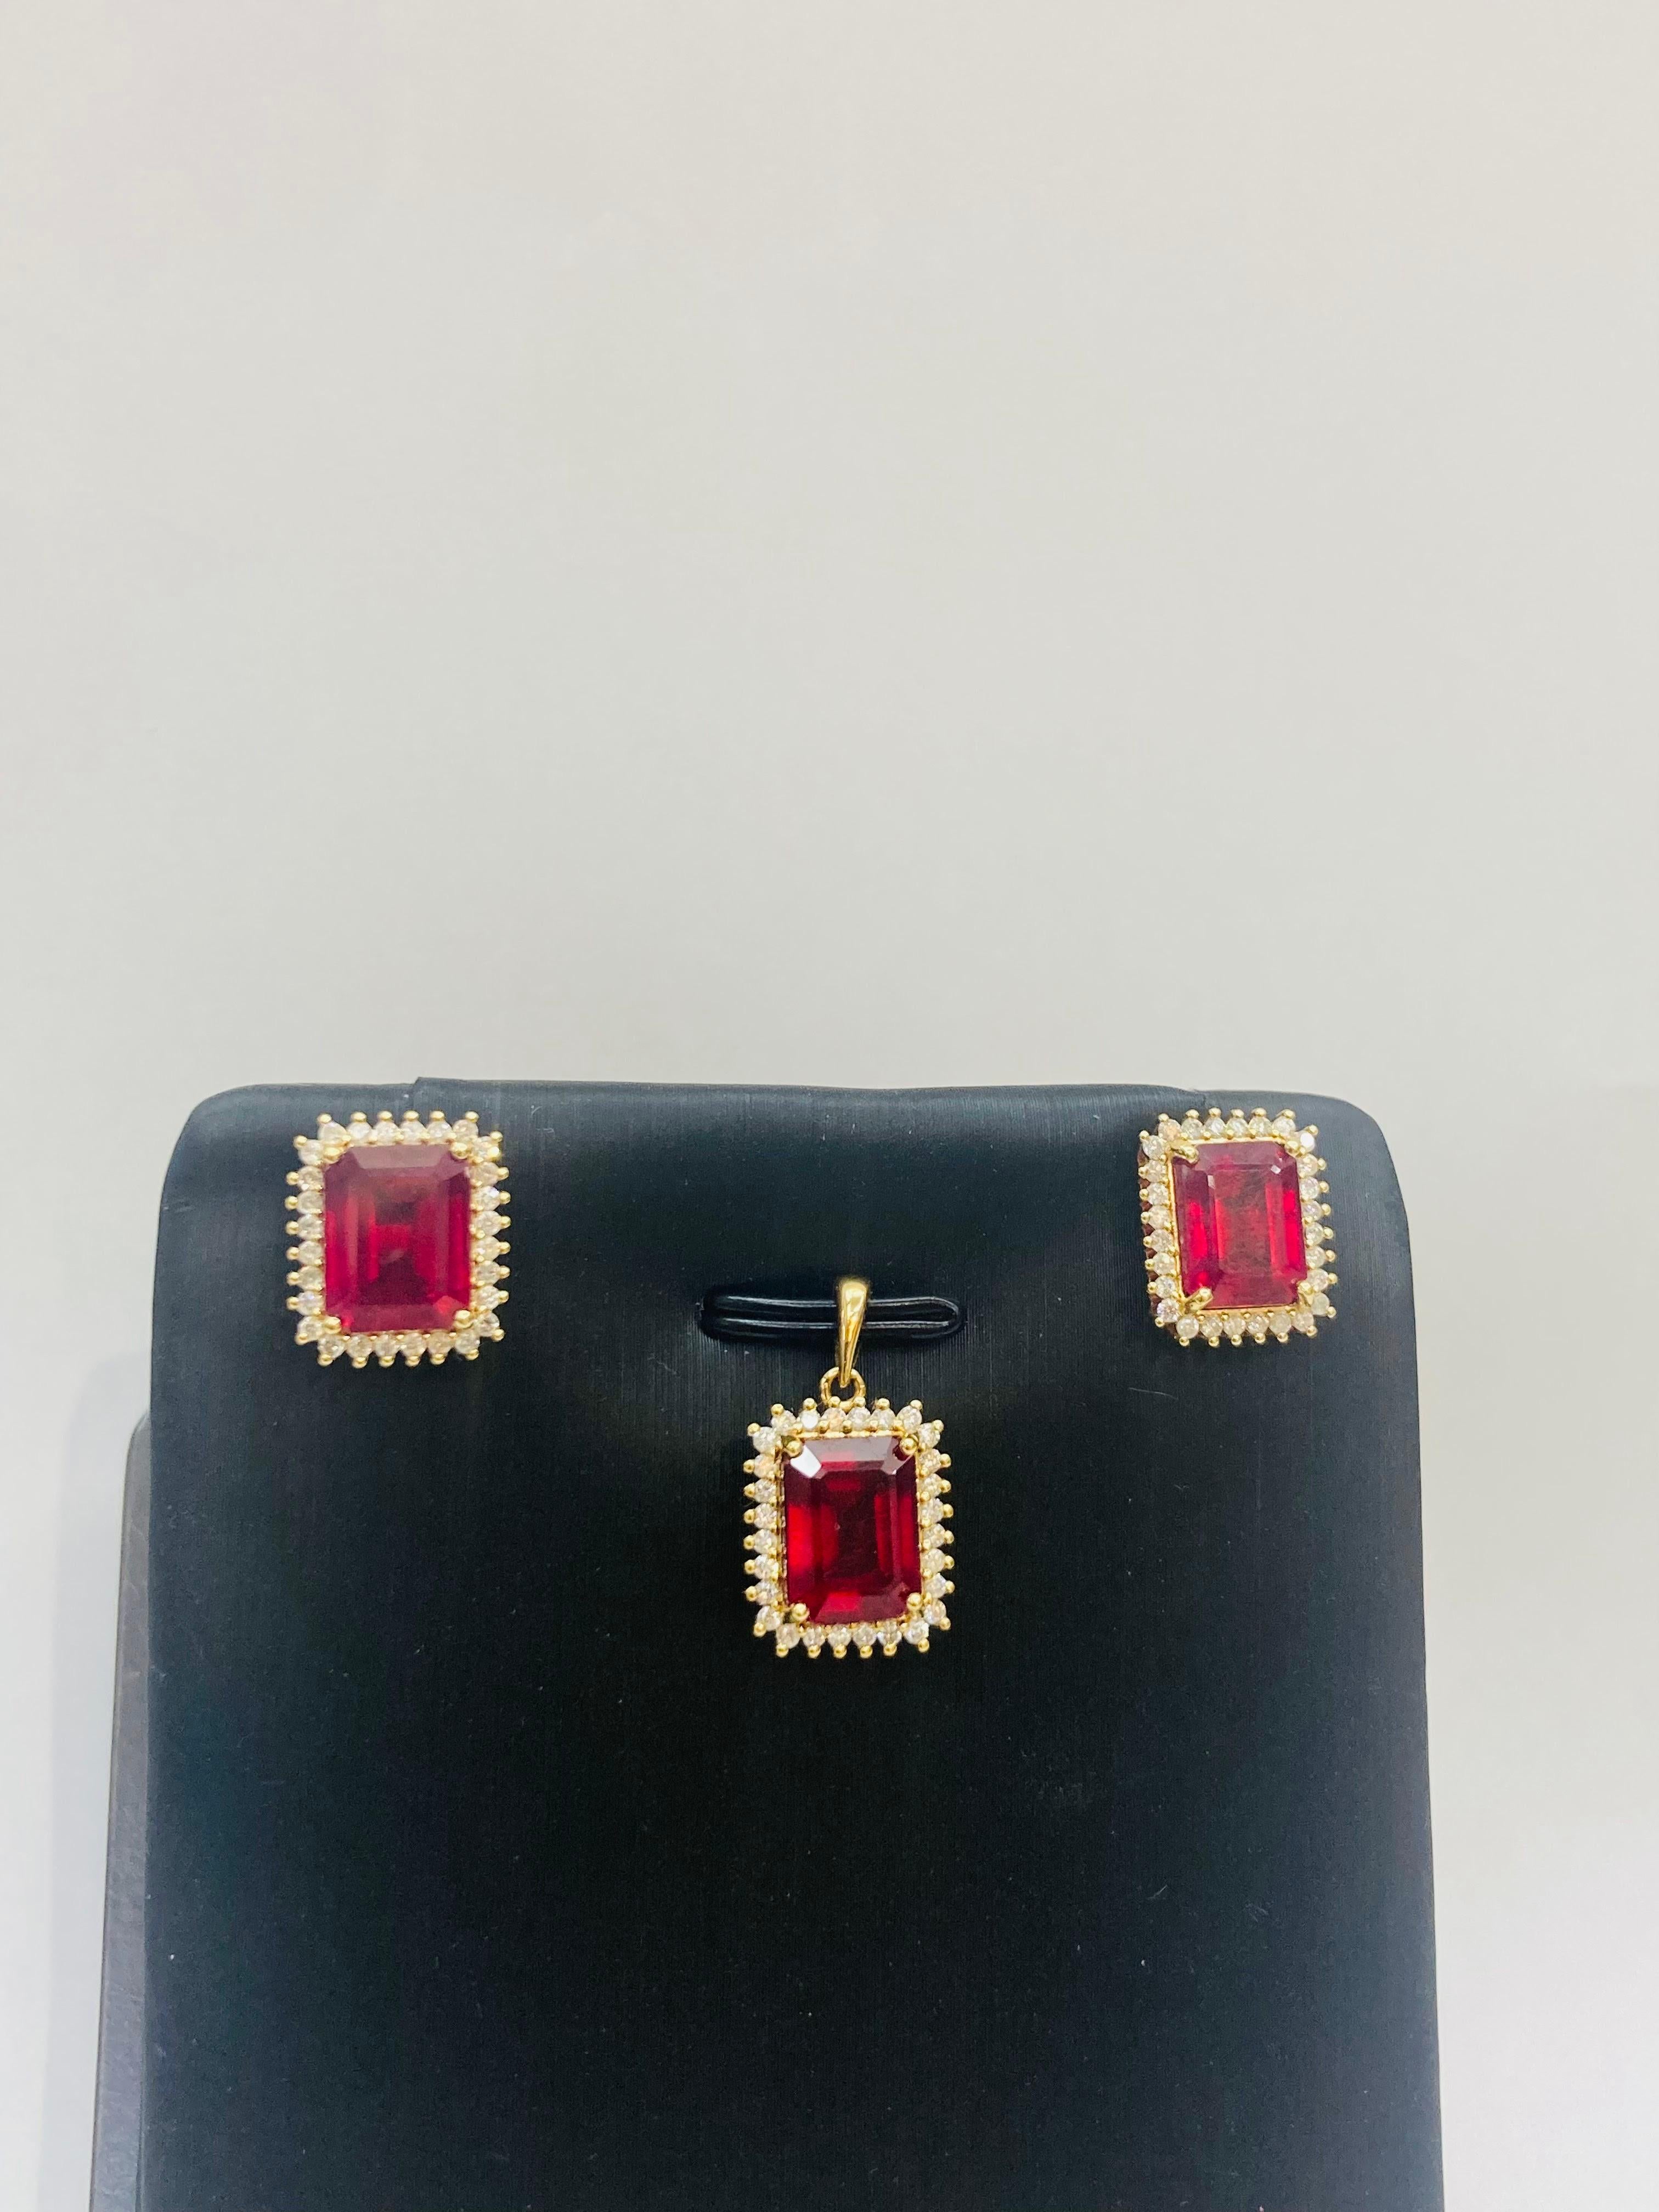 Bochic “Retro Vintage” Diamond & Ruby Retro Set, Earrings & Pendent In 18K Gold  In New Condition For Sale In New York, NY